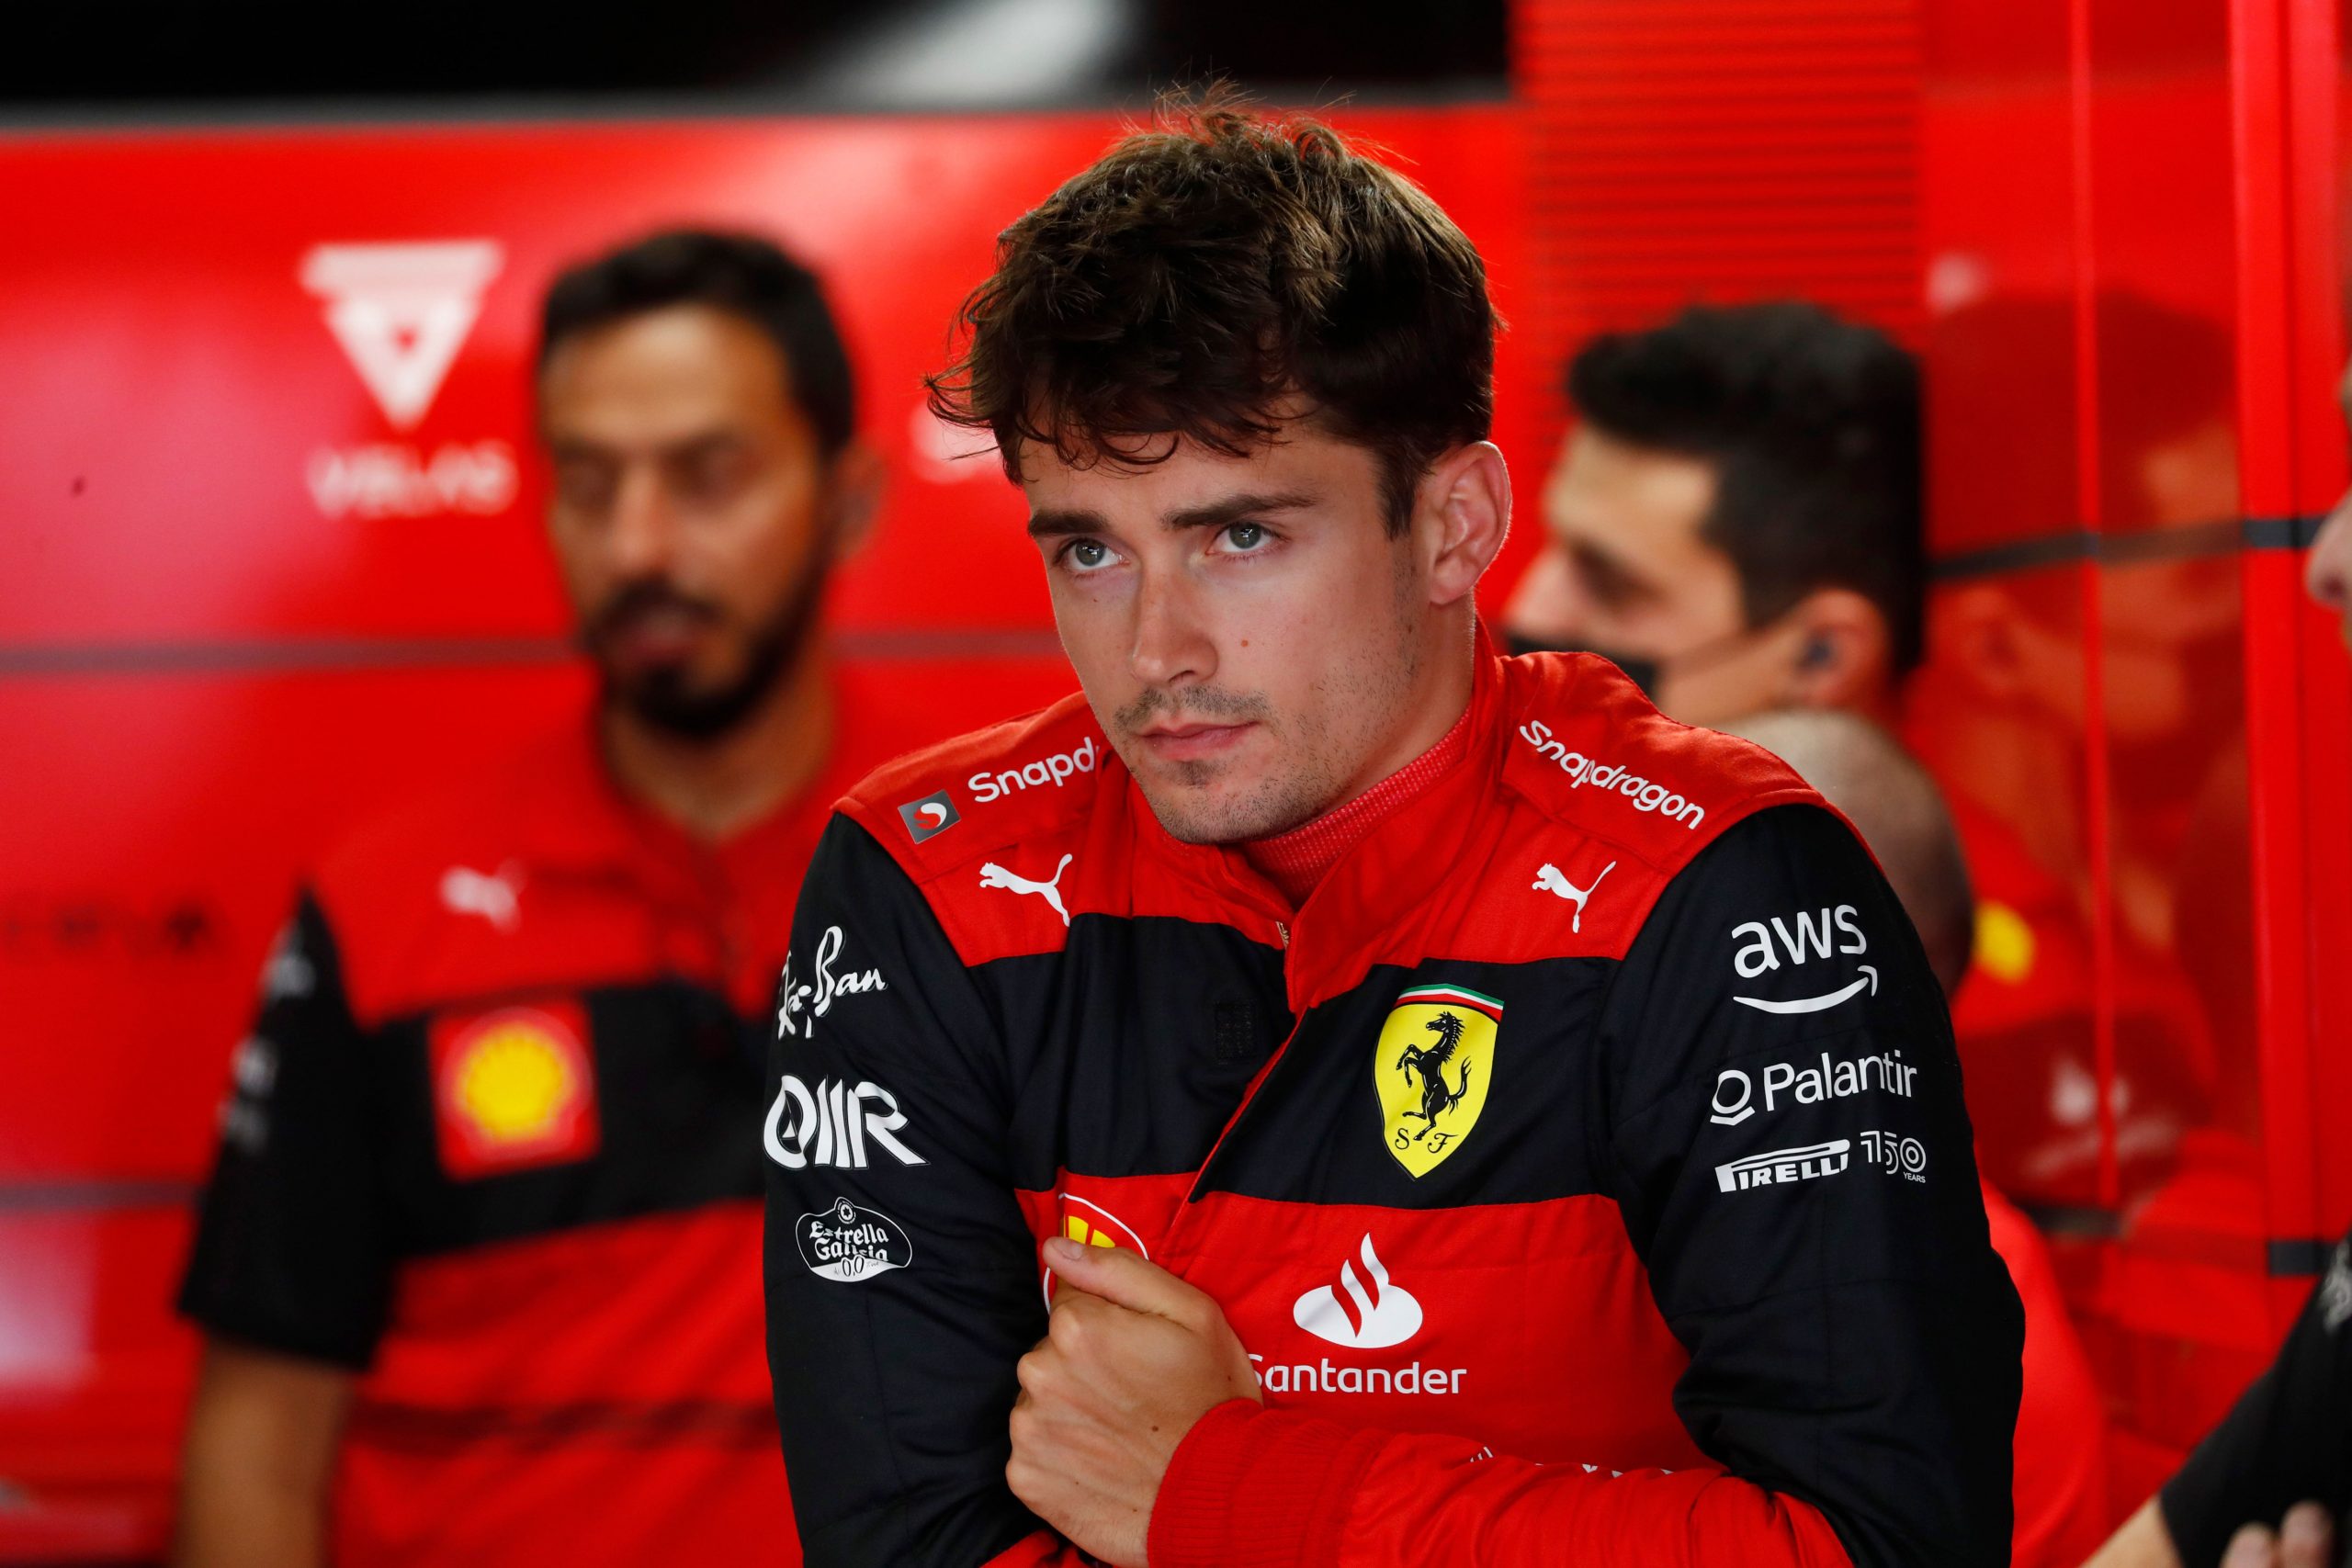 Leclerc wary of losing advantage after taking pole at Spanish GP